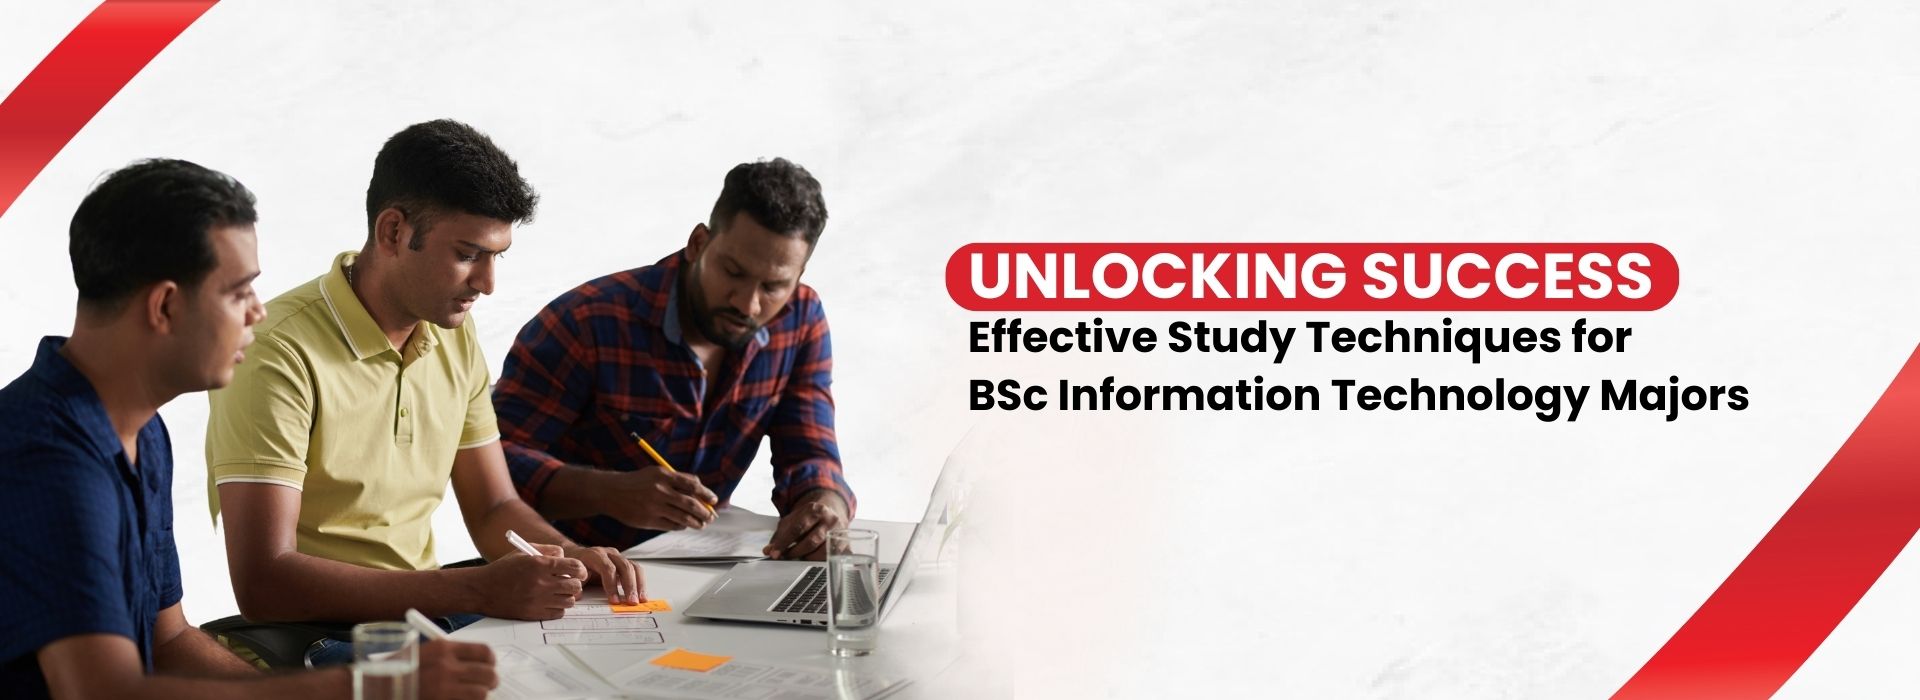 Unlocking Success: Effective Study Techniques for BSc Information Technology Majors